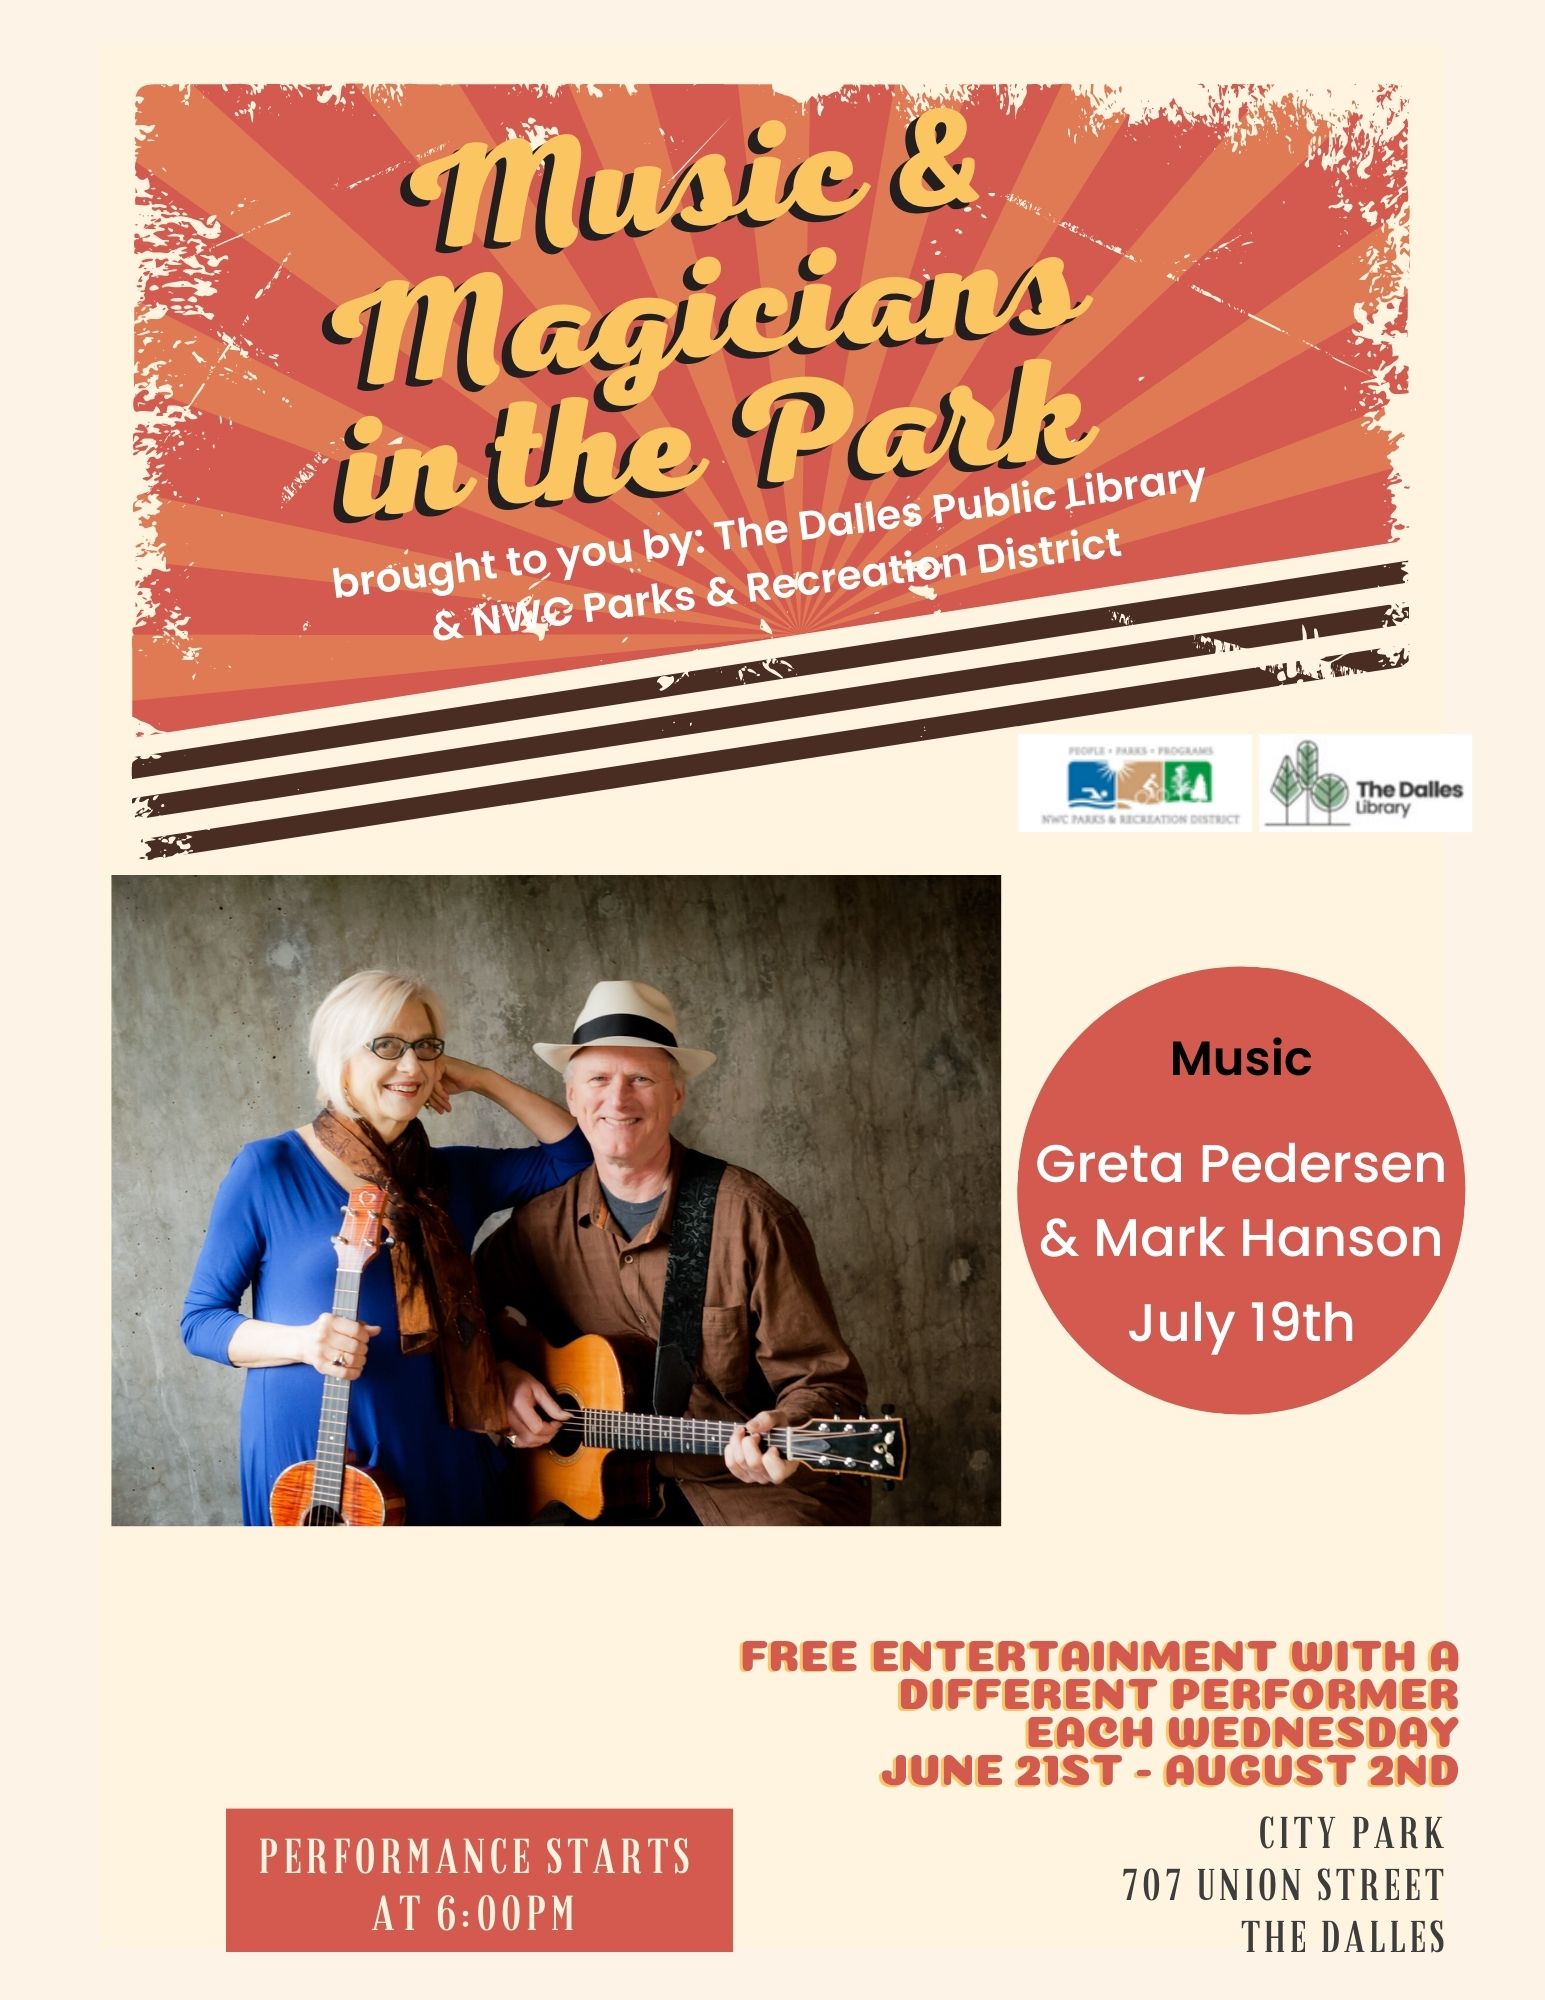 Greta Pederson and Mark Hanson will share their amazing musical abilities with us